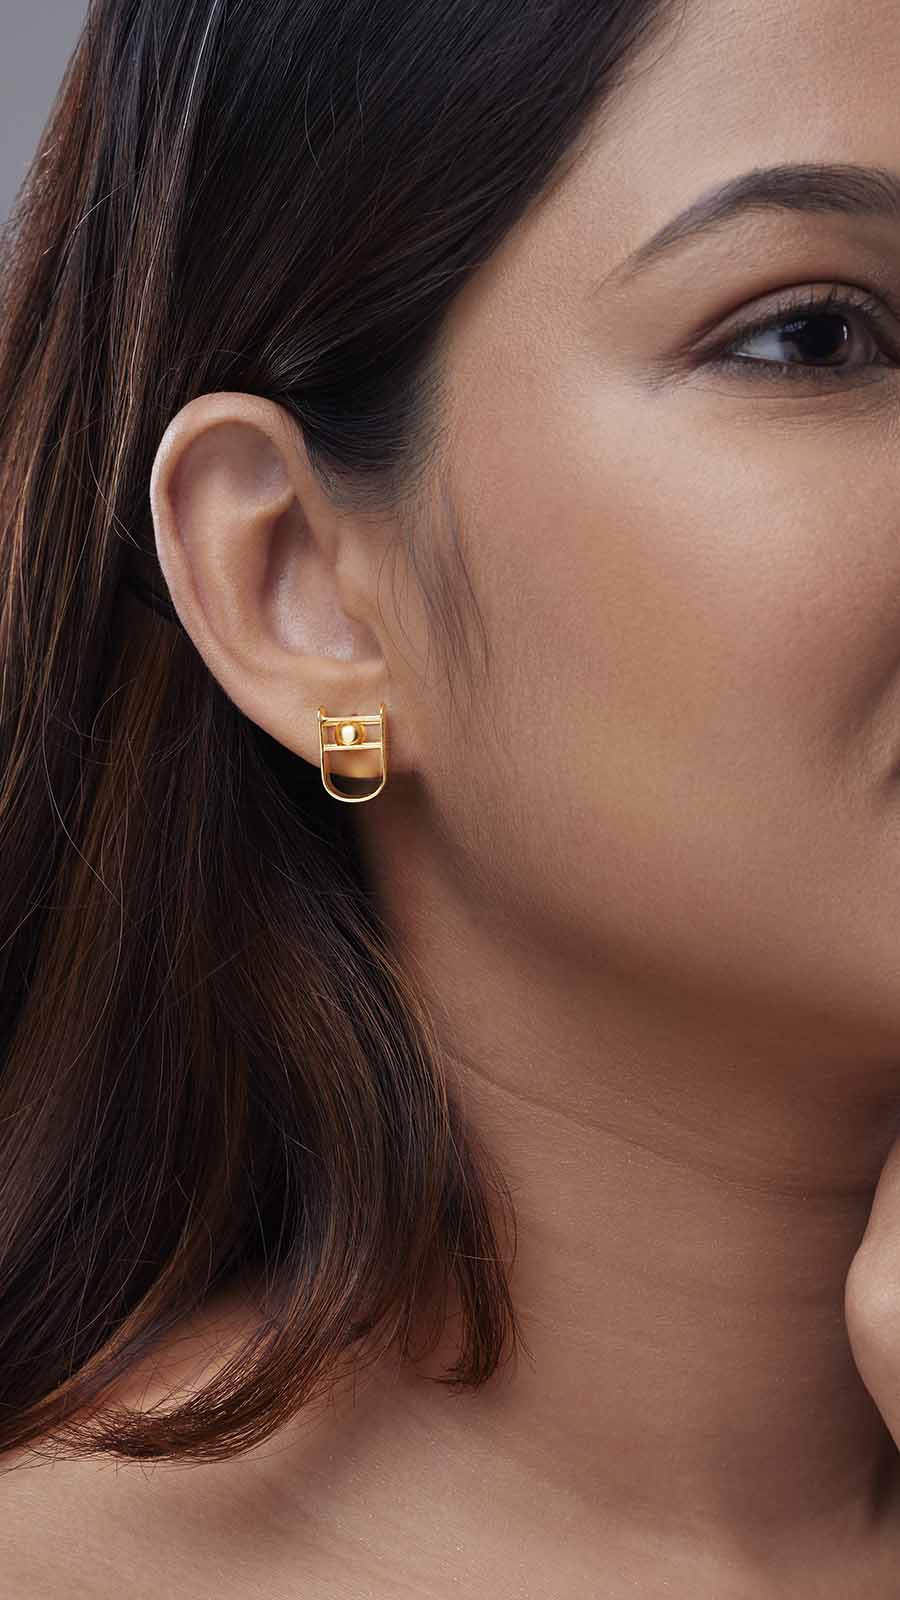 Zoomed picture of an indian working woman wearing balance earrings